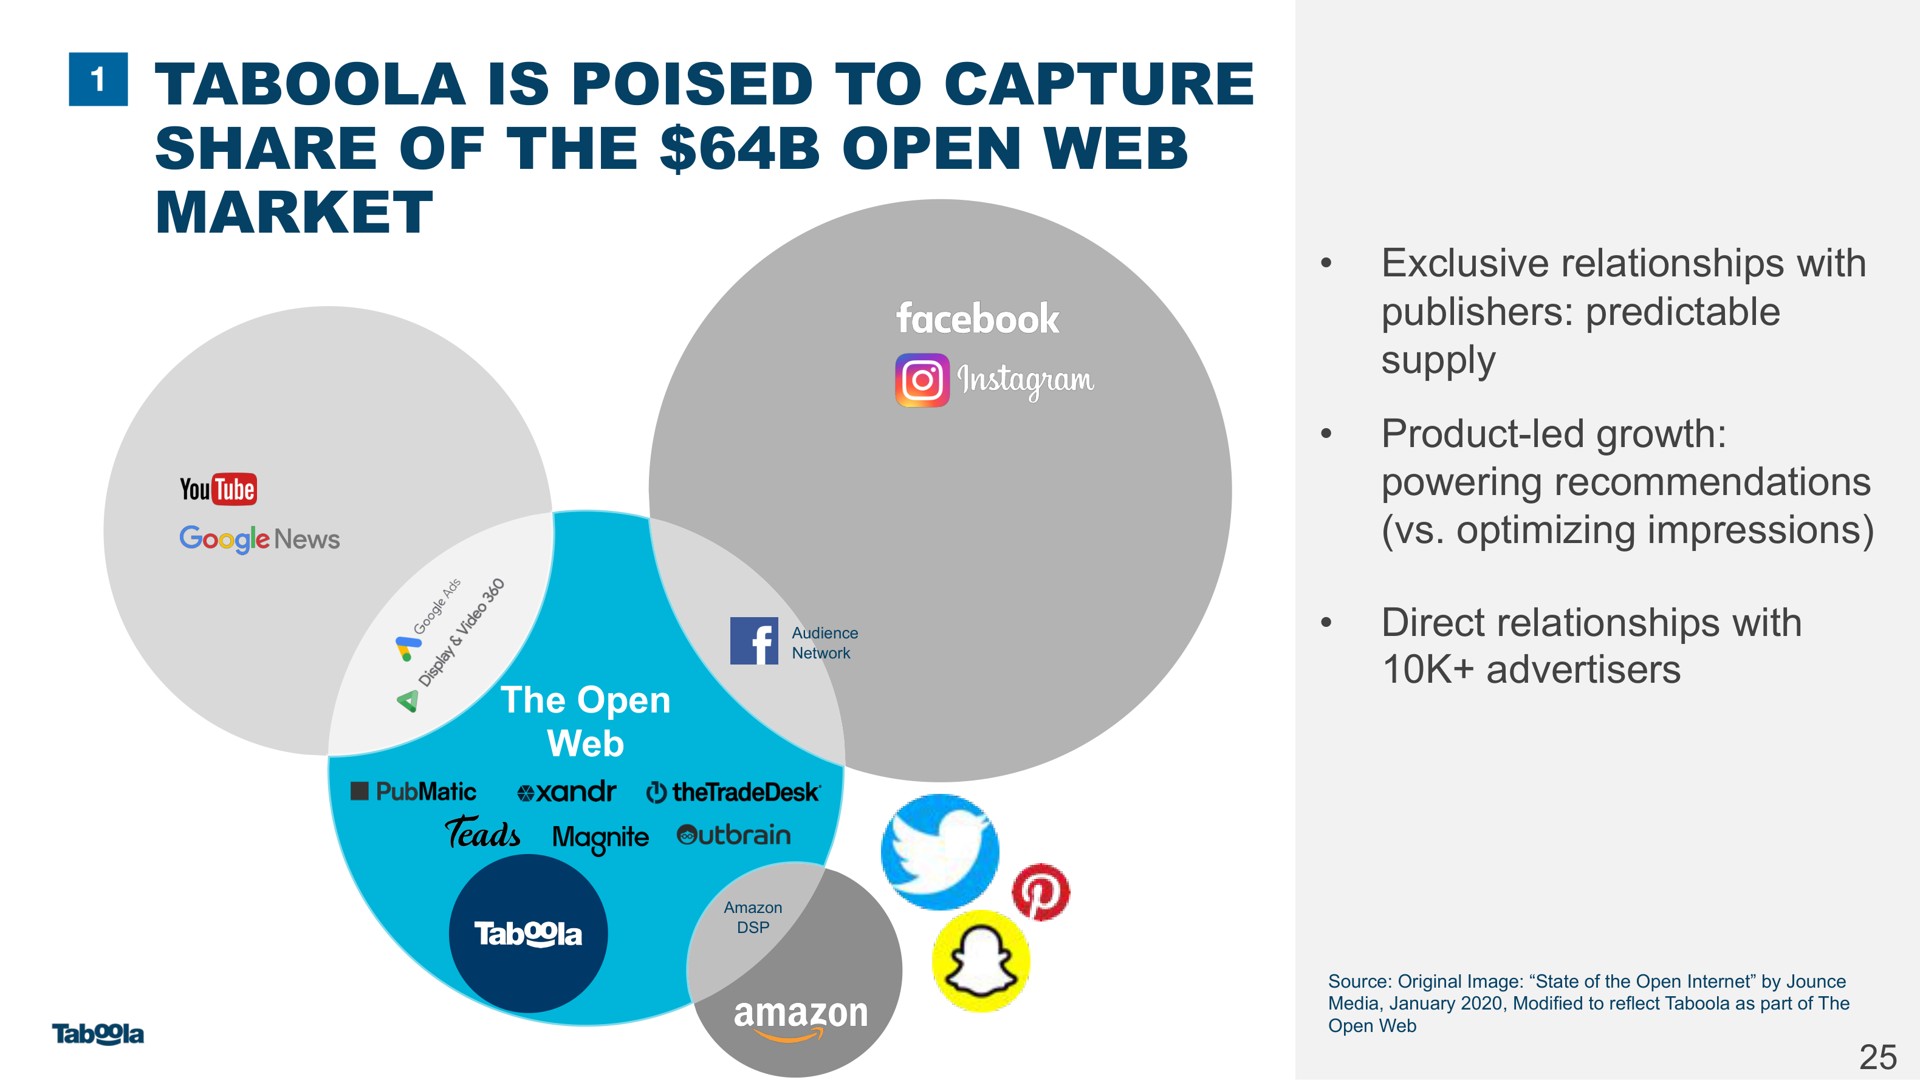 is poised to capture share of the open web market | Taboola